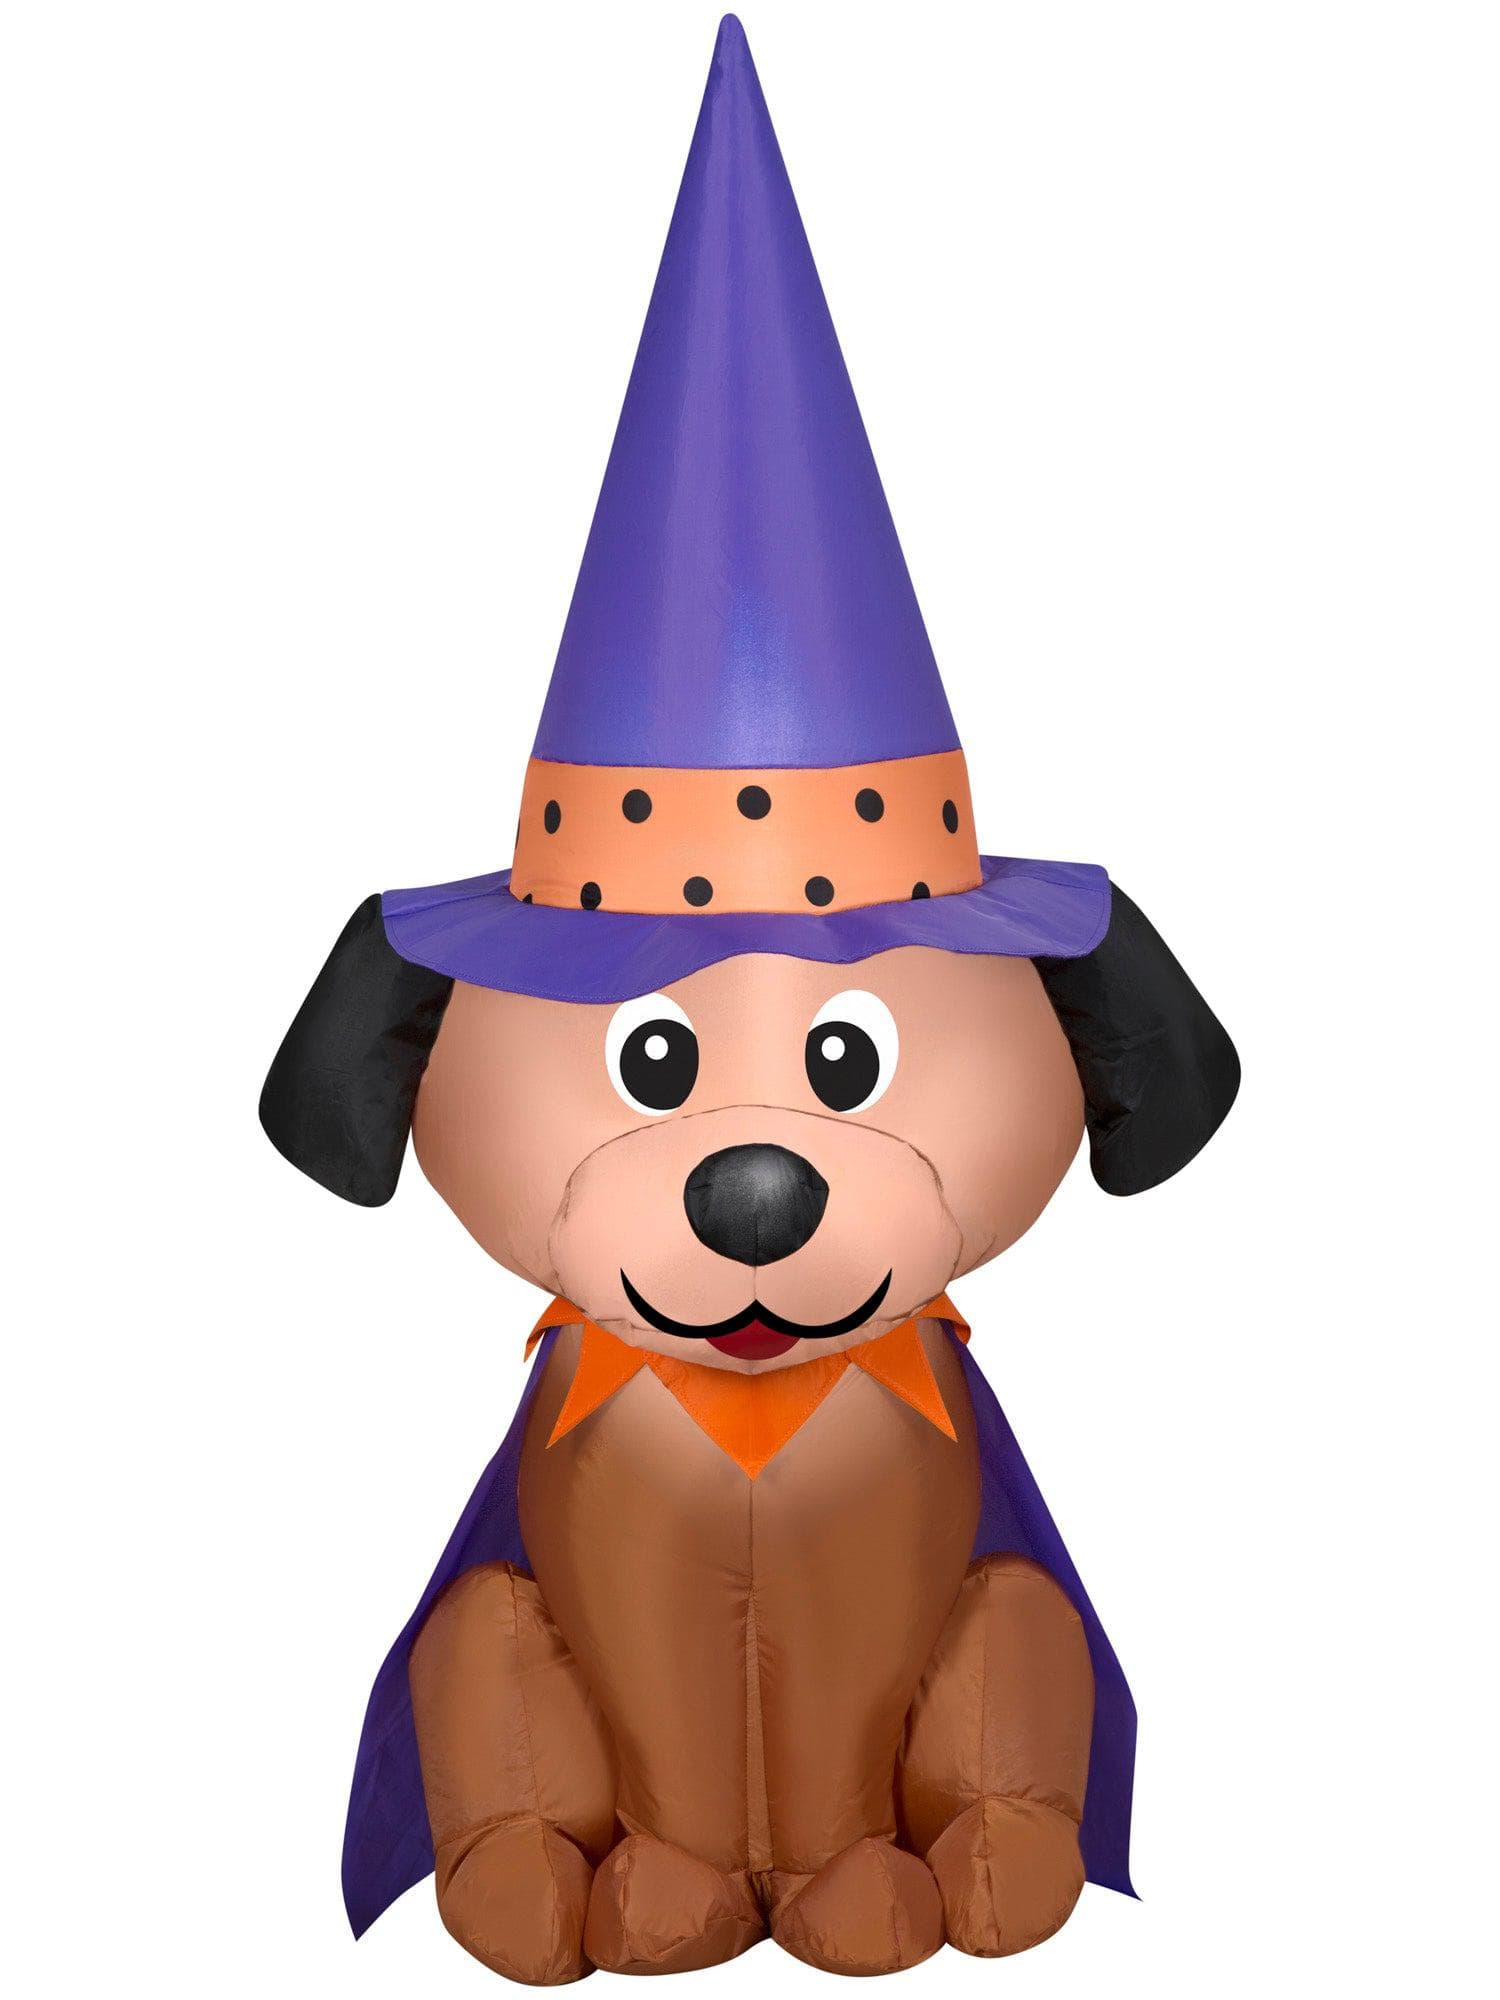 4 Foot Witch Dog Light Up Halloween Inflatable Lawn Decor - costumes.com